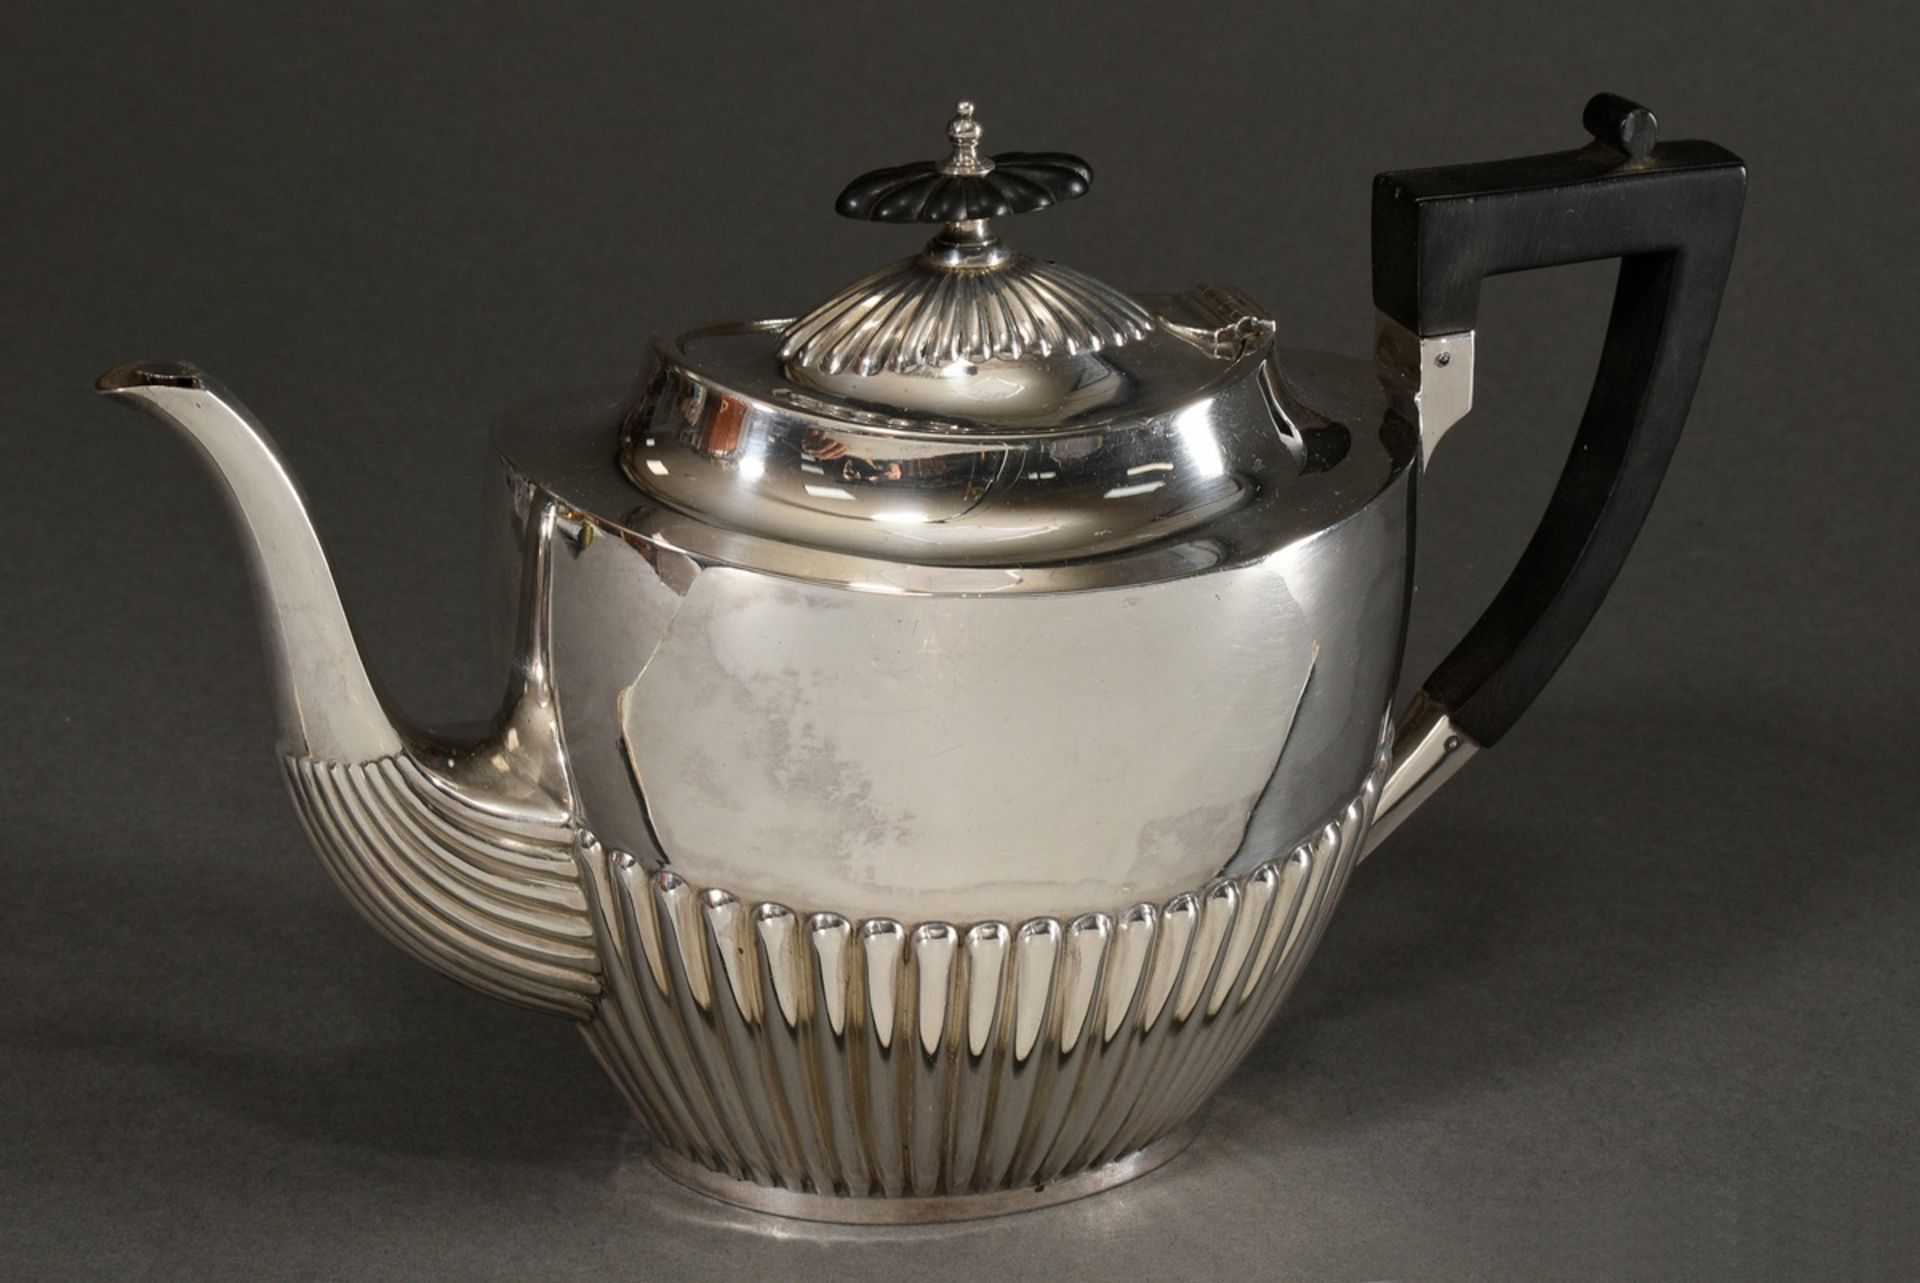 Queen Ann style teapot with engraved motto "In Deo Omnia" and blackened wooden handle, MM: John Edw - Image 2 of 9